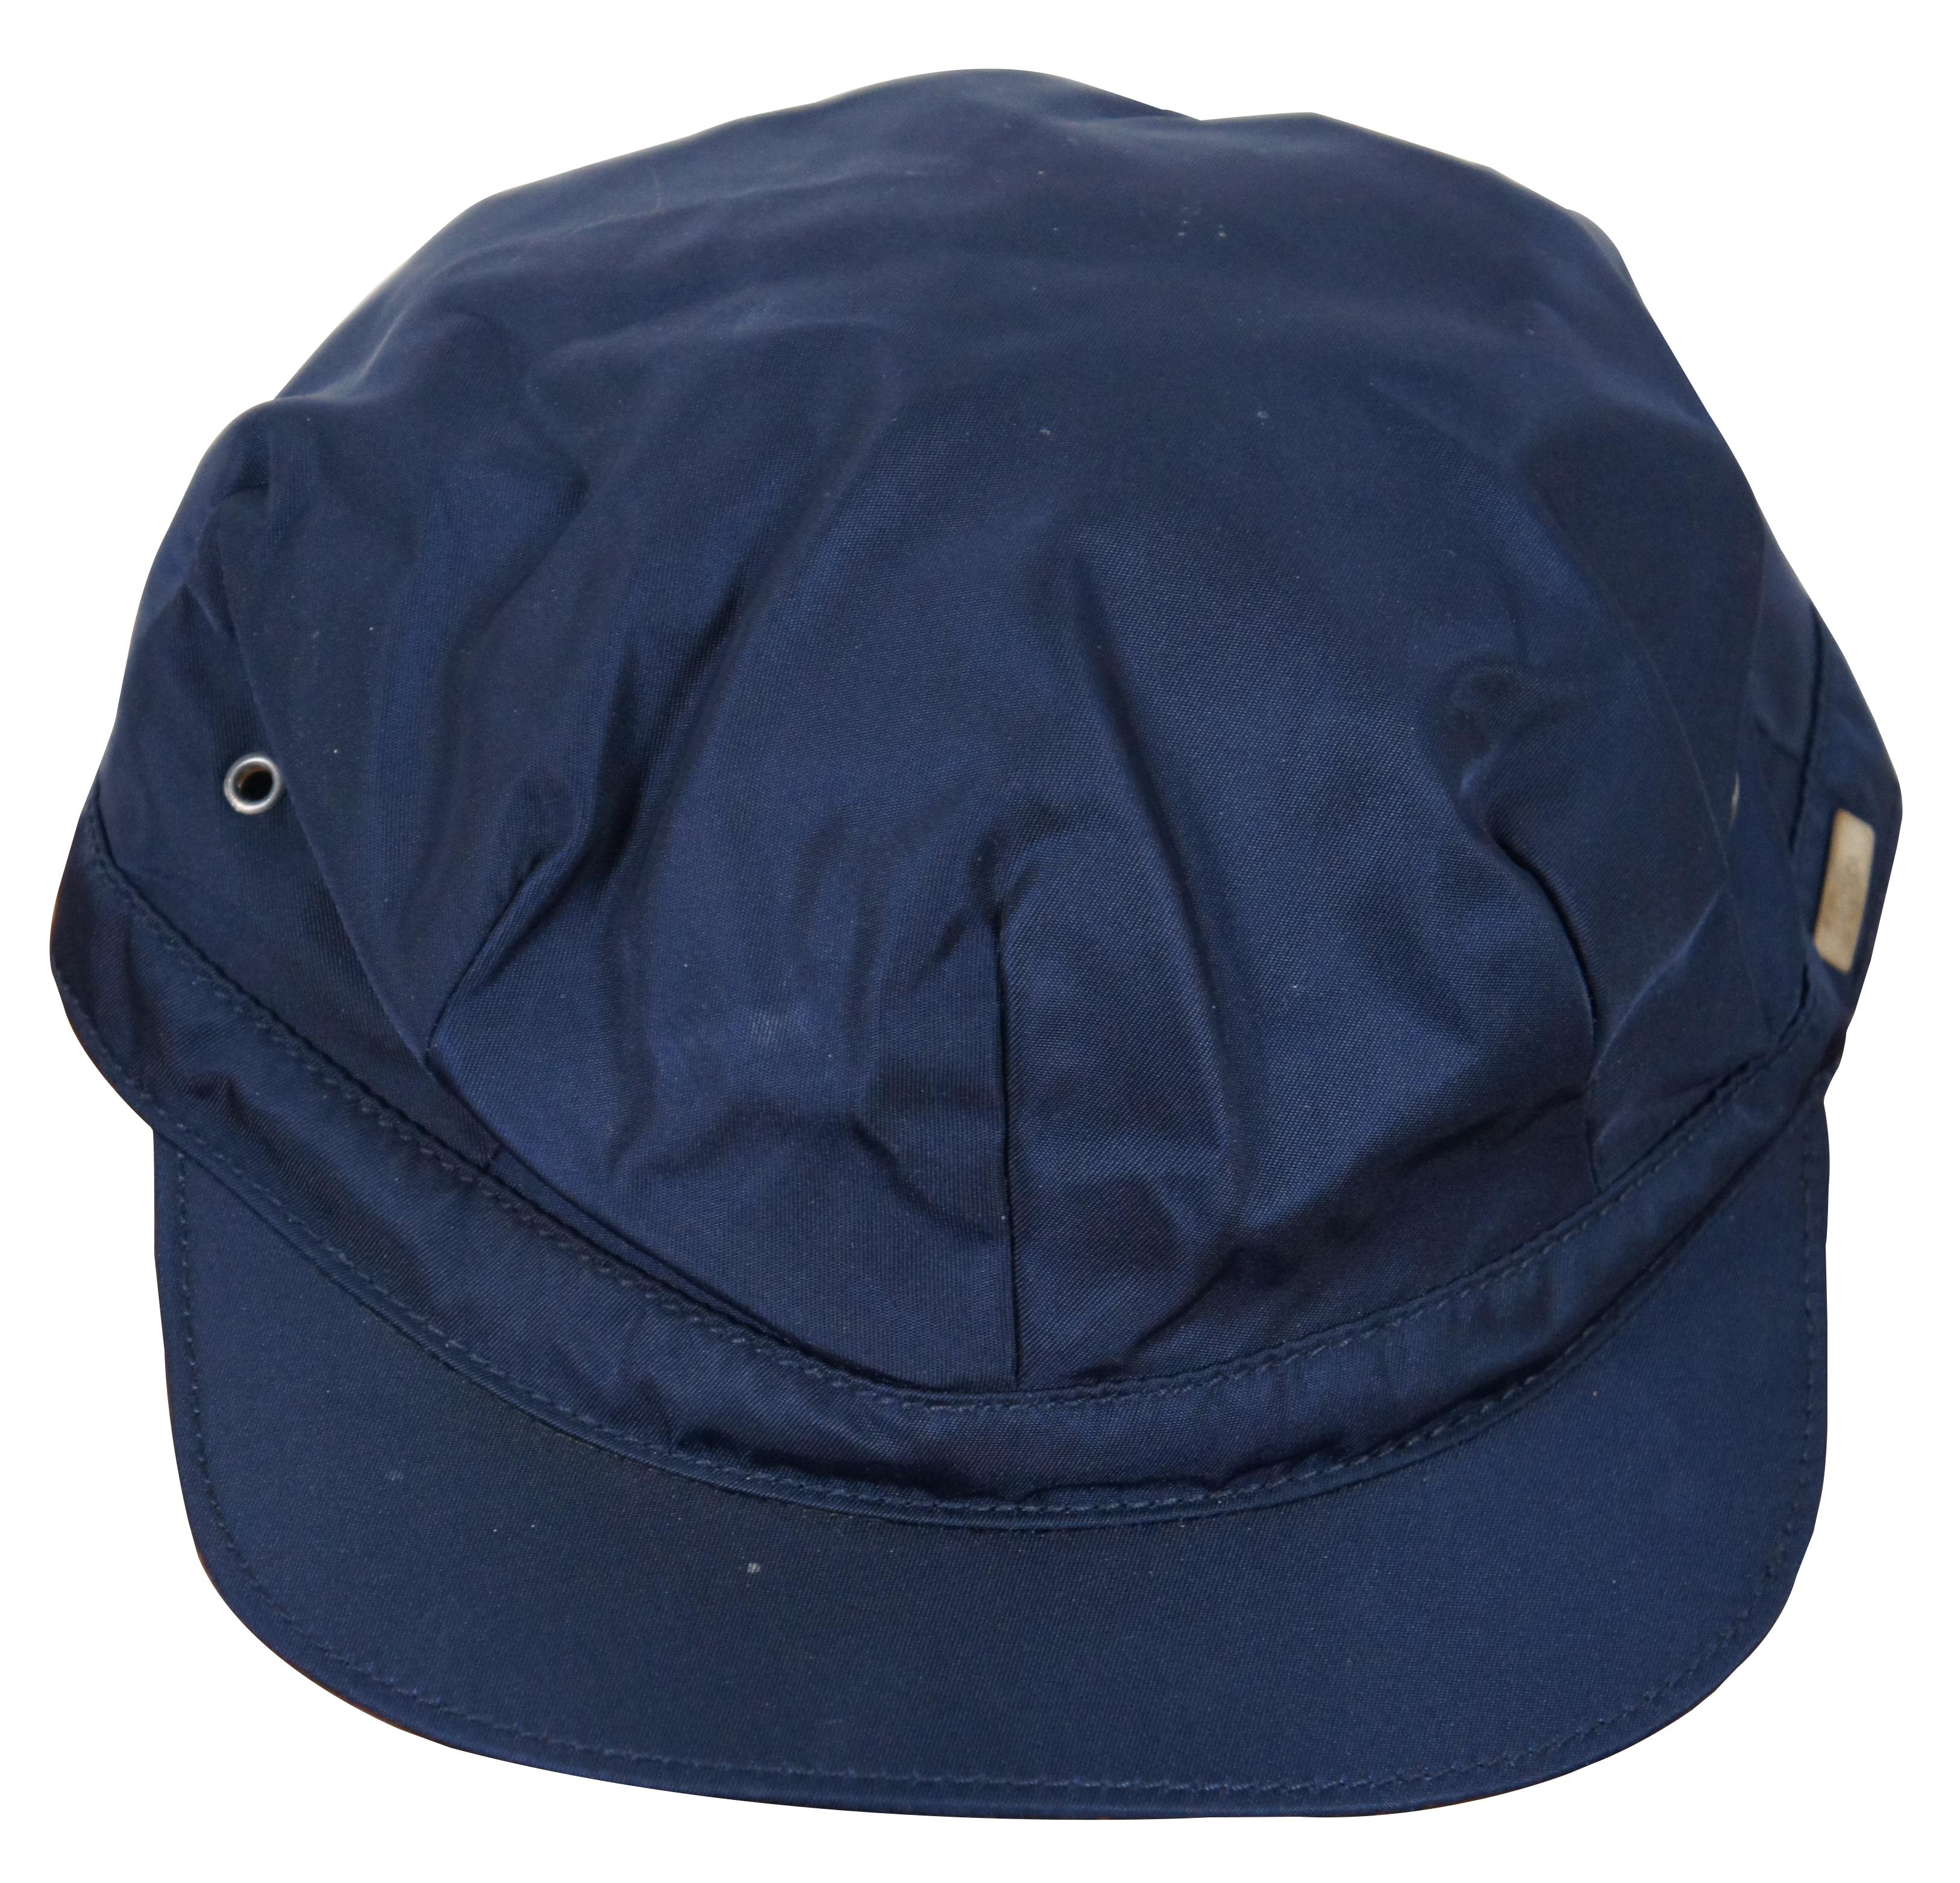 Rare vintage short brim Prada navy blue polymide cycling / fisherman / train conductor style cap / hat with eyelet accents.

Size M / 7” x 8.5” x 3.5” / Approx Circumference – 22